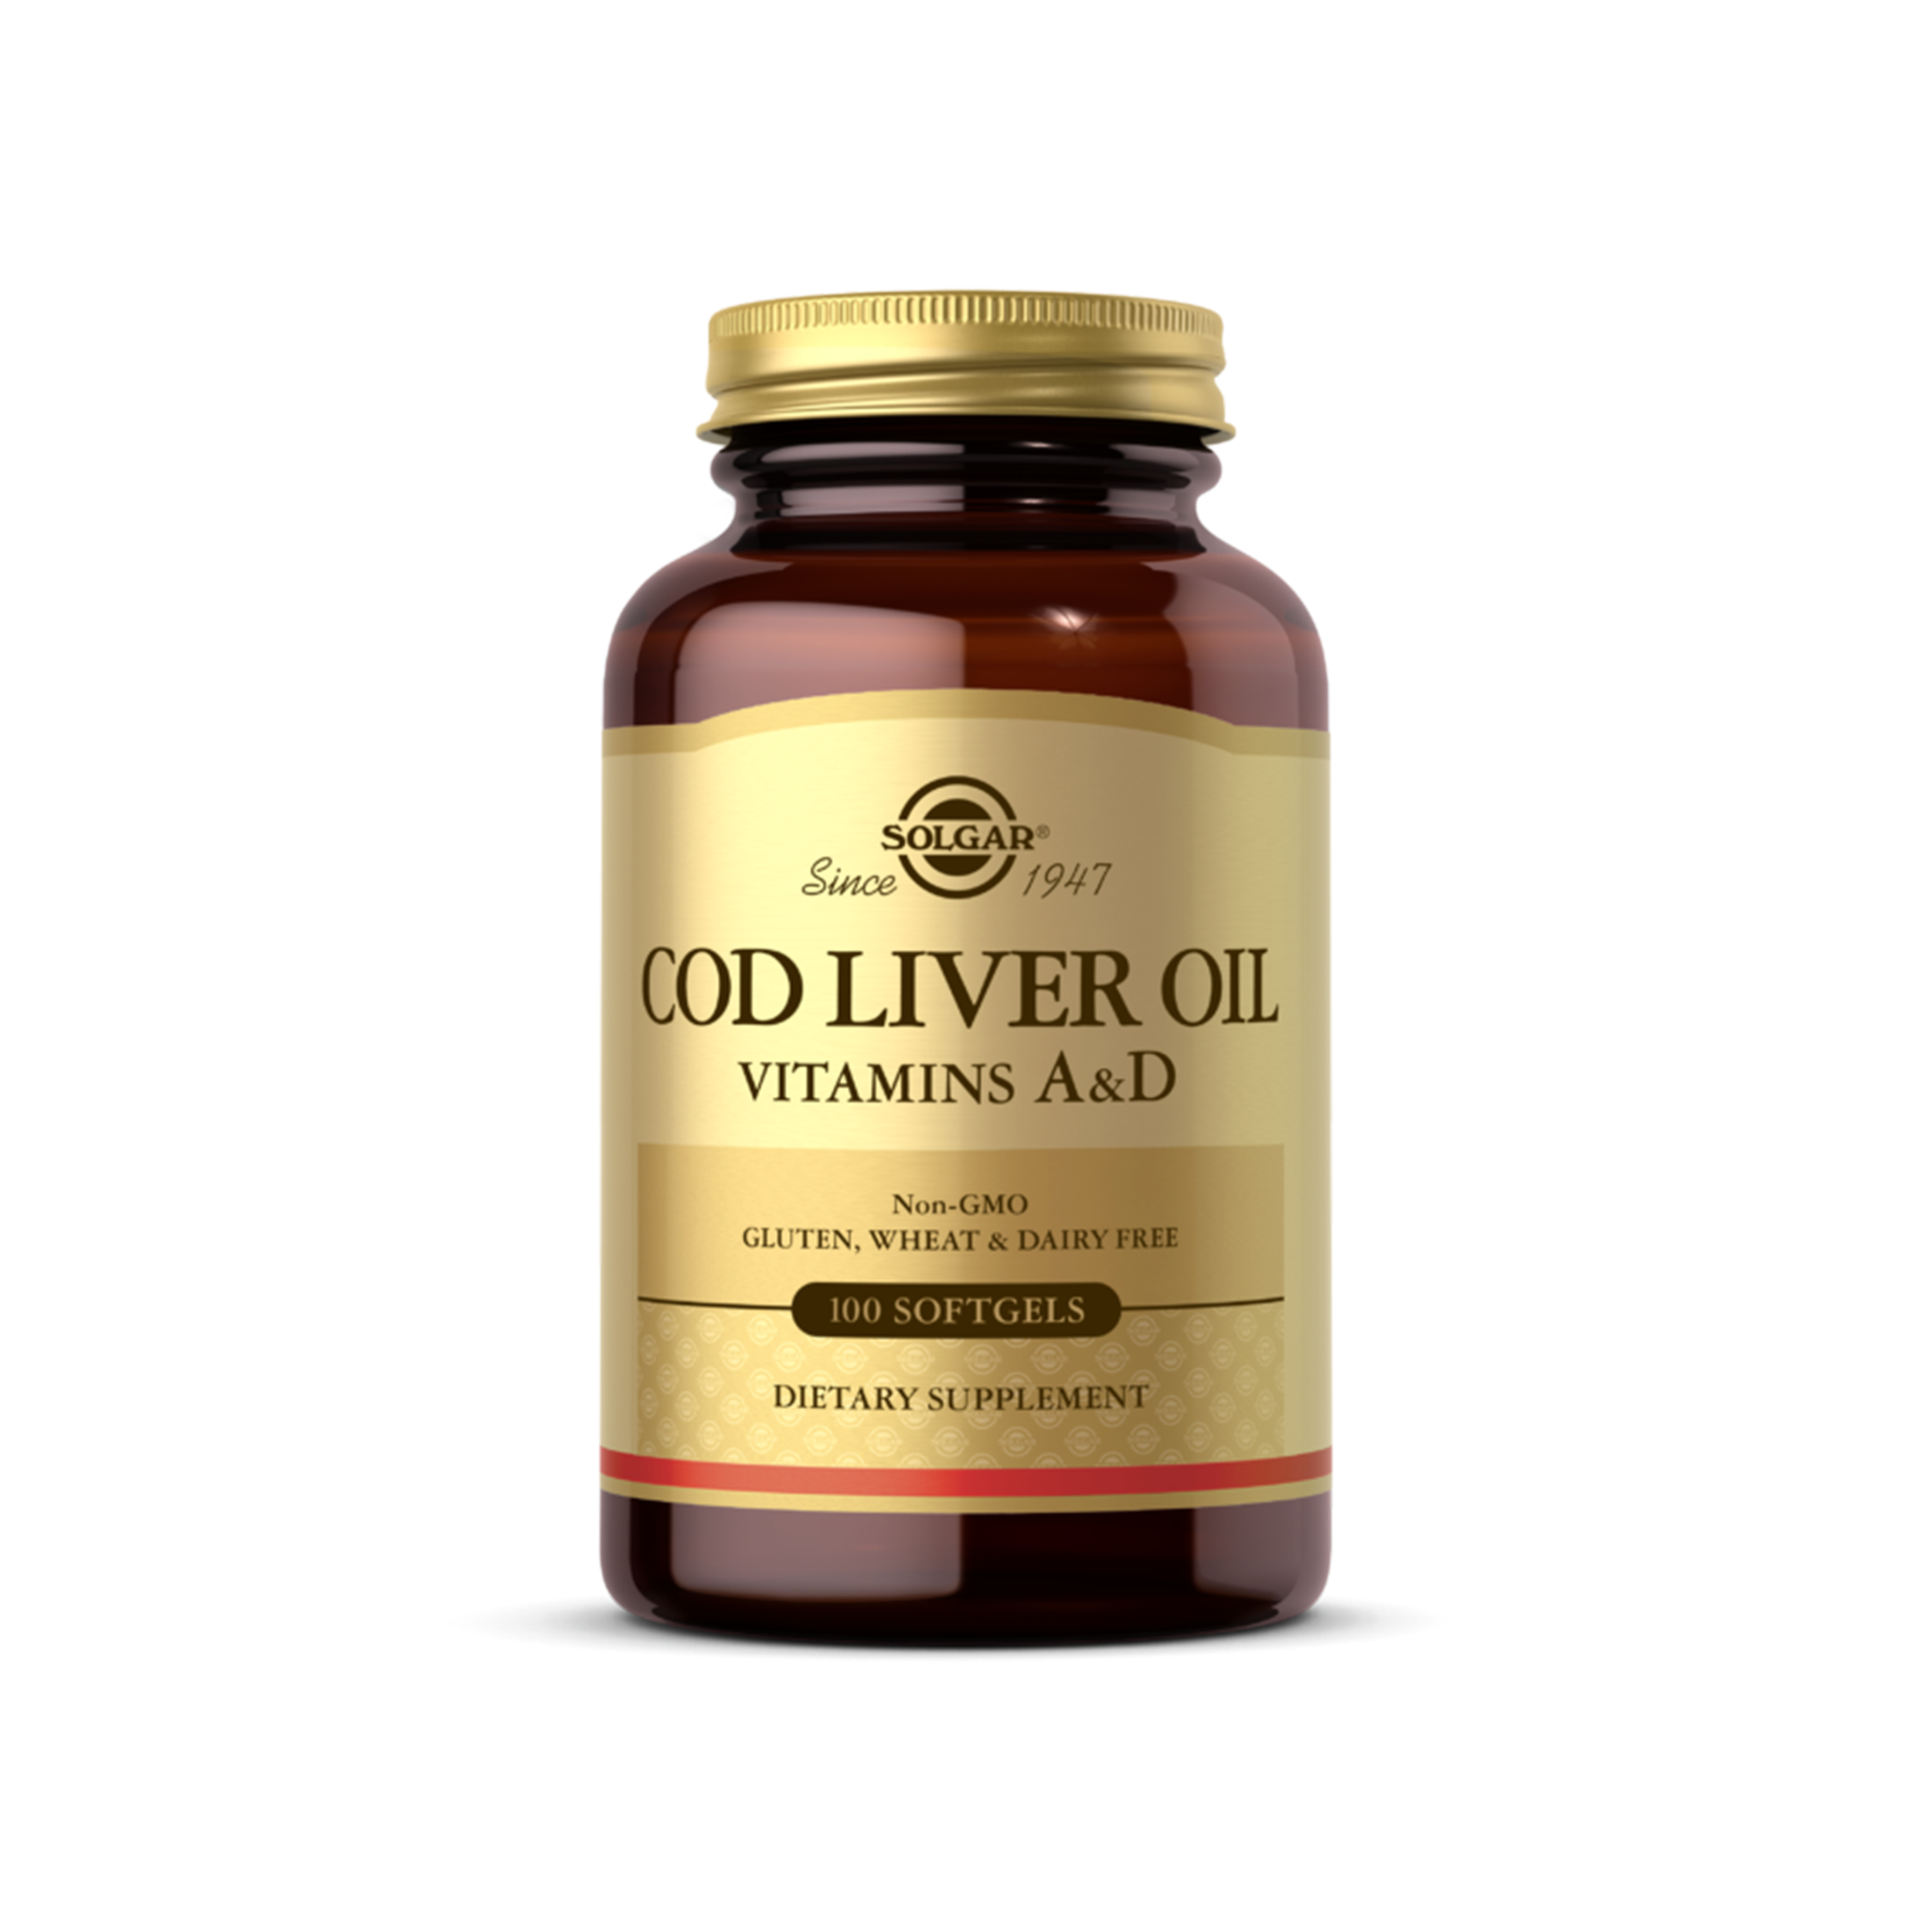 SOLGAR COD LIVER OIL WITH A&D SOFT GEL 100S